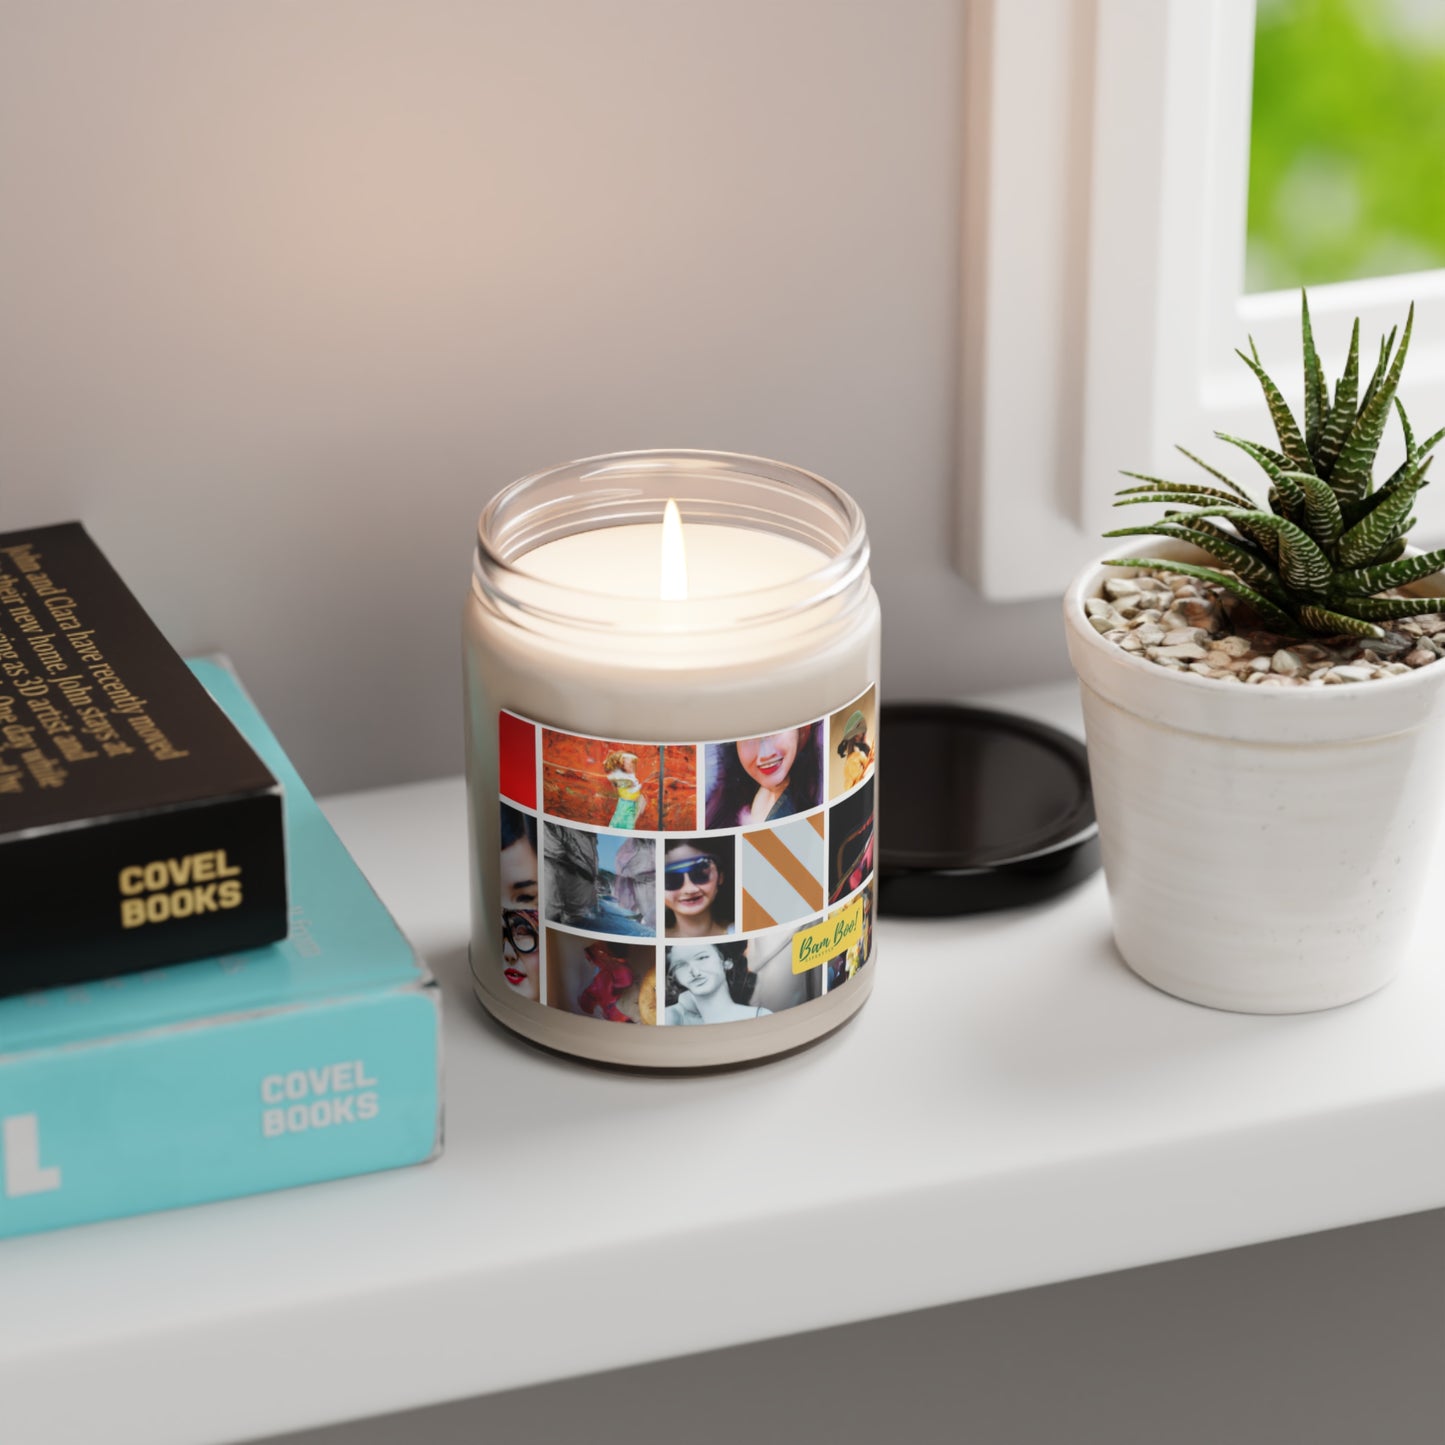 "My Reflection Digital Collage" - Bam Boo! Lifestyle Eco-friendly Soy Candle